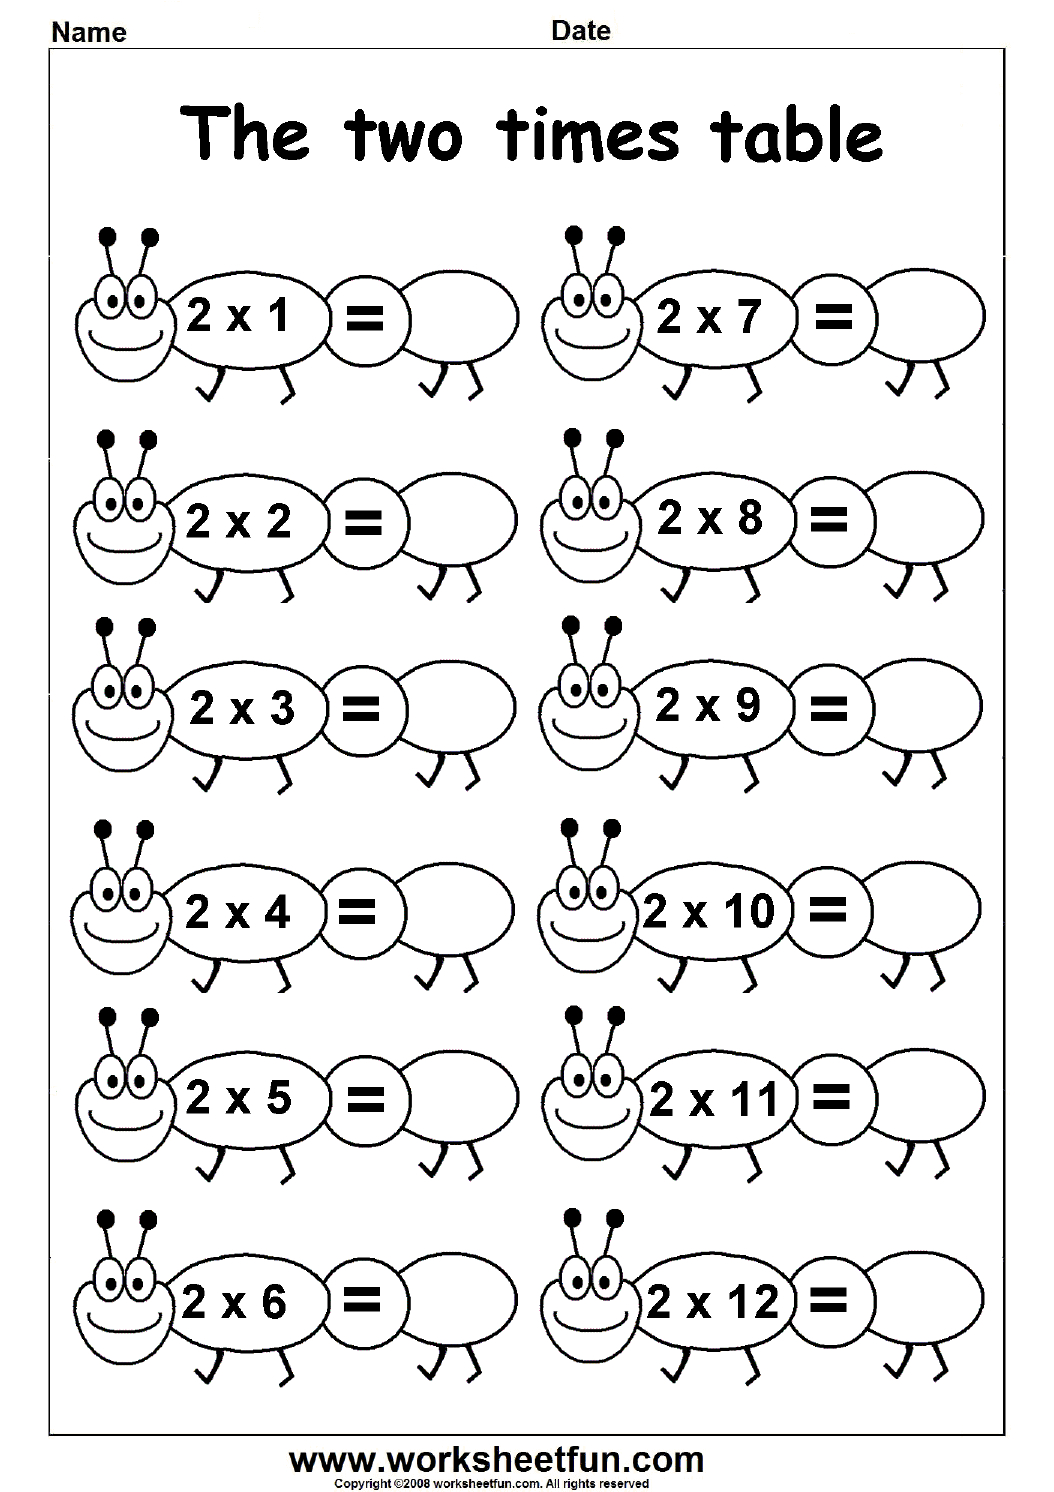 Multiplication Worksheets 2 And 3 Times Tables | Printable